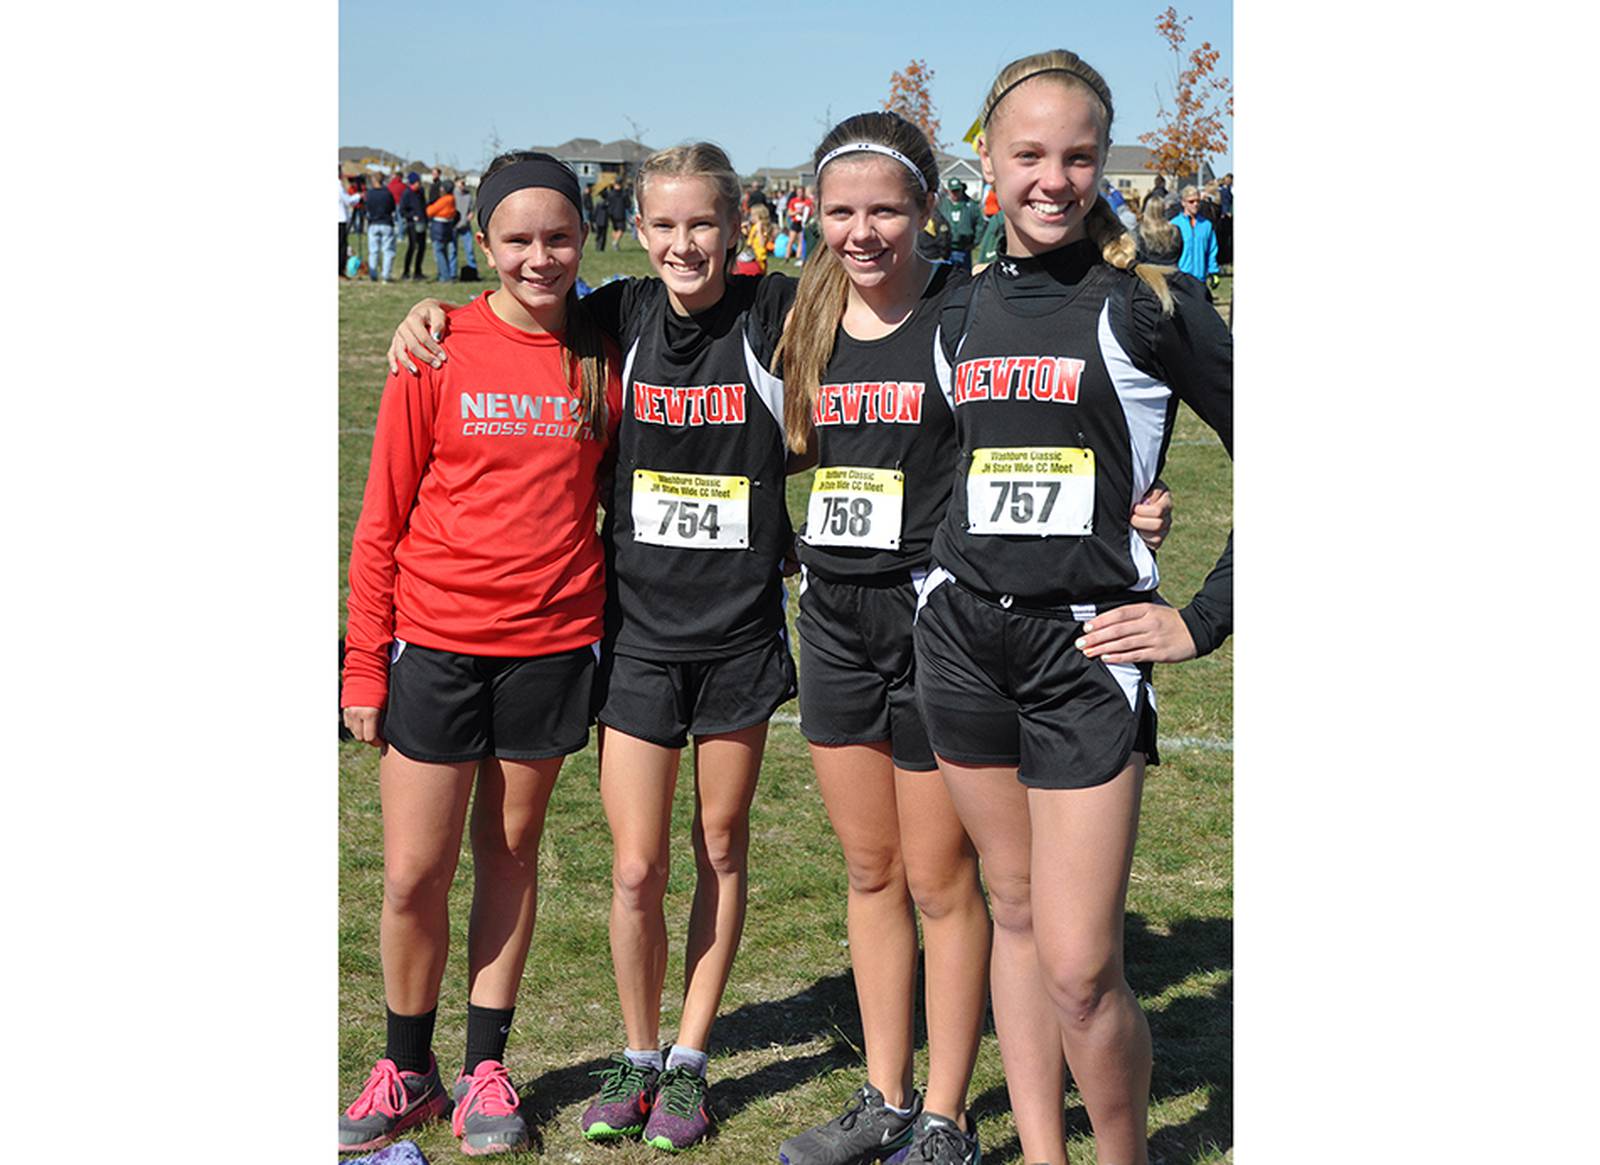 Newton harriers compete at middle school state cross country meet